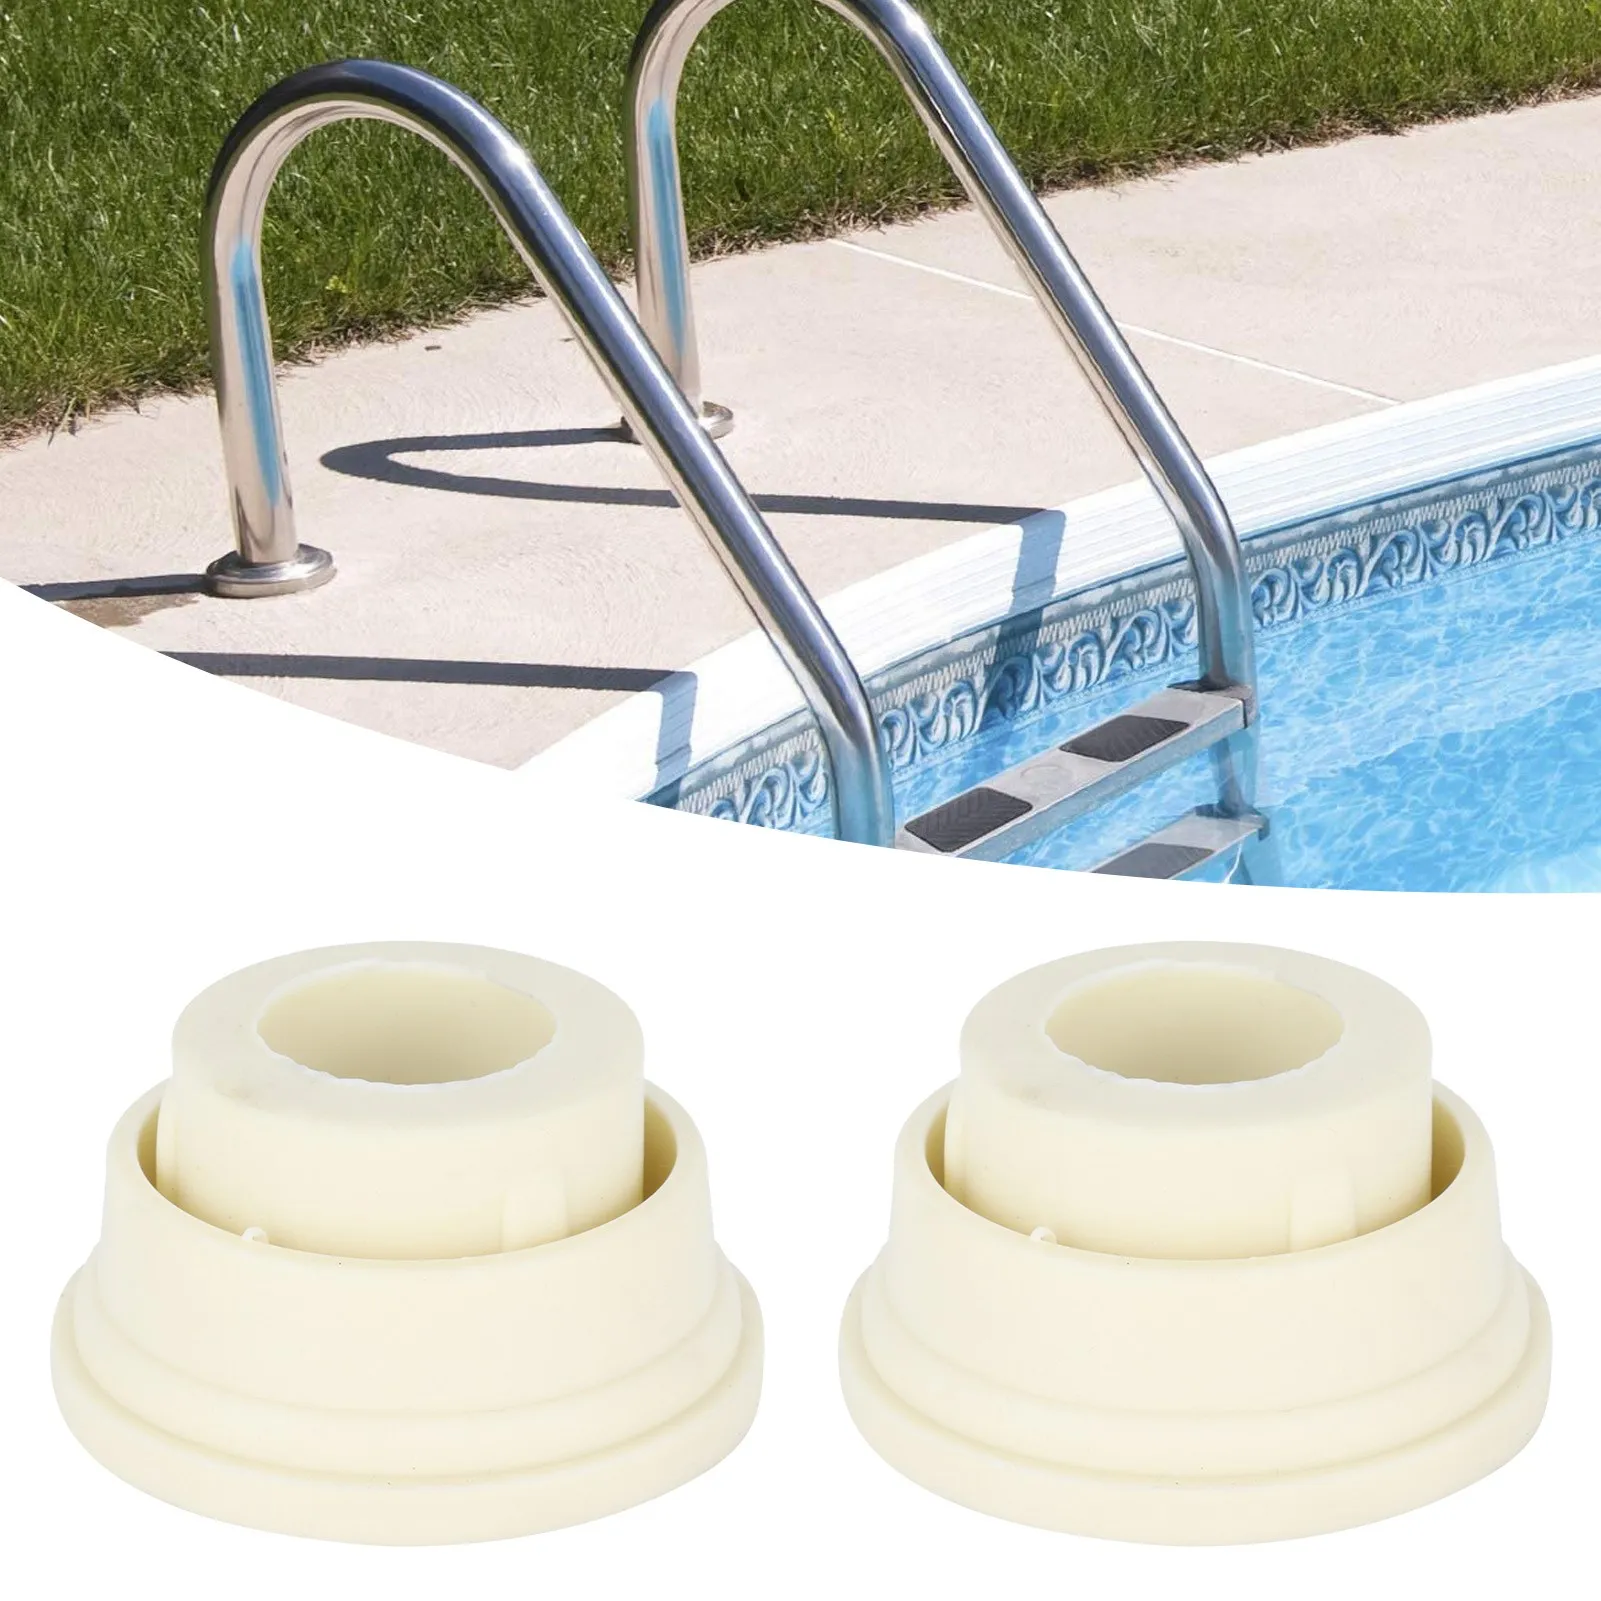 

2Pcs Pool Ladder Bumpers Inground Pool Ladder End Caps Swimming Pool Ladder Replacement Parts Rubber Stoppers Safety Guard